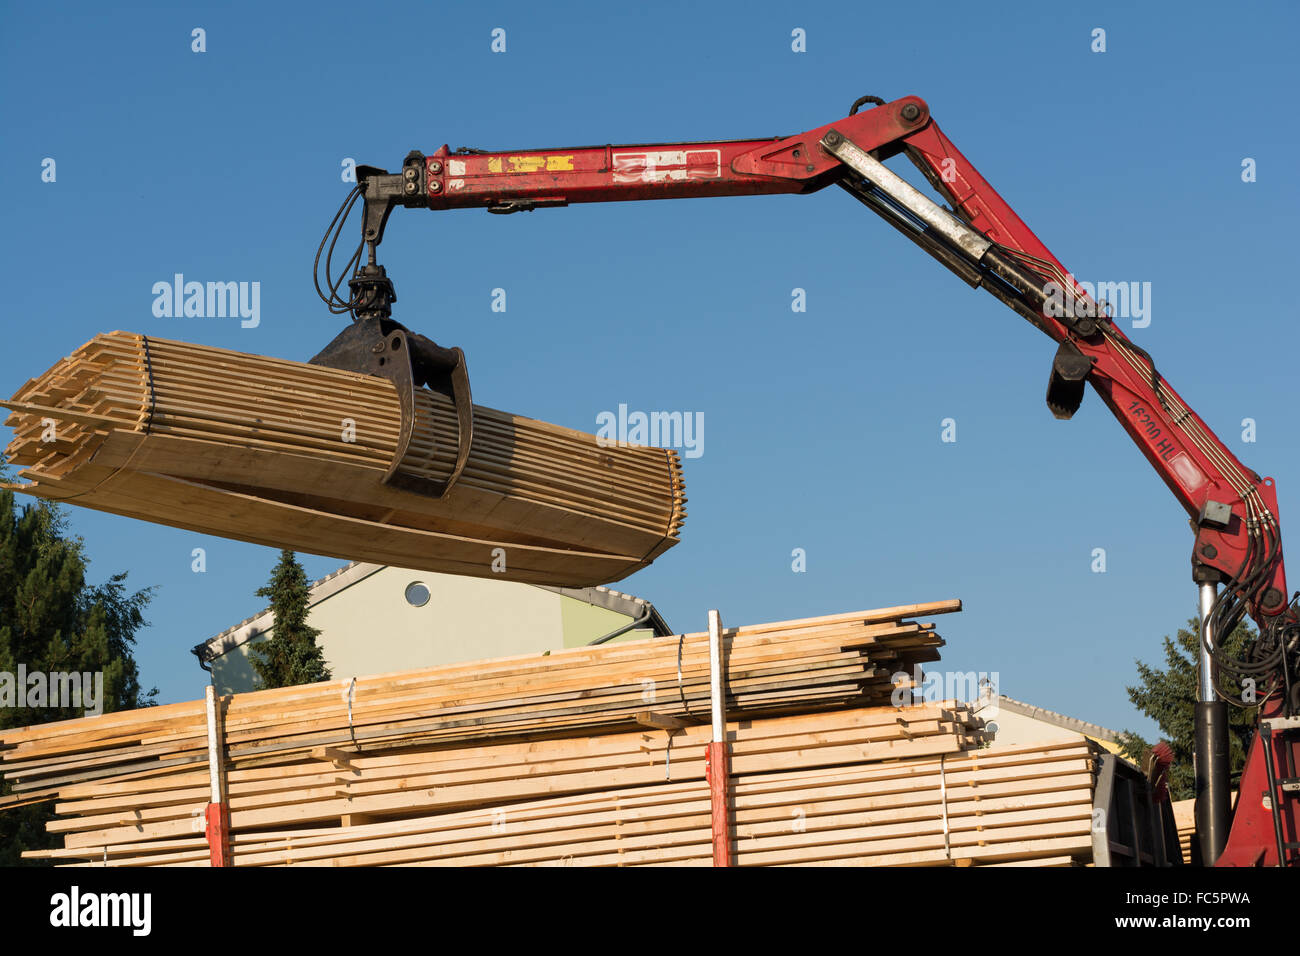 Truck crane lifts with gripper Timber Stock Photo